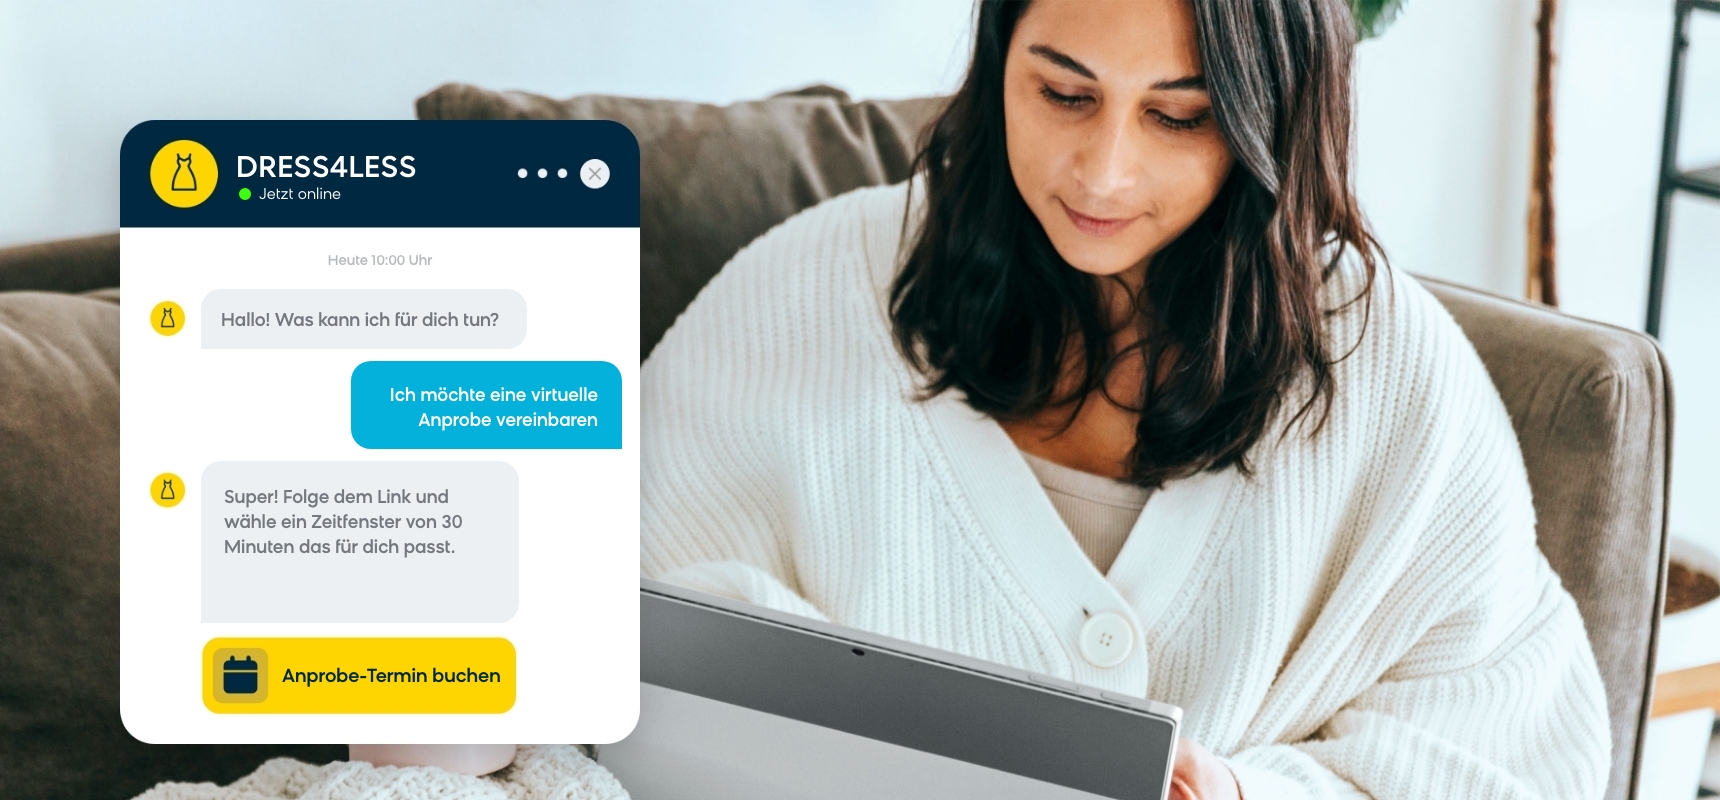 Example of AI personalization with AI-powered chatbots